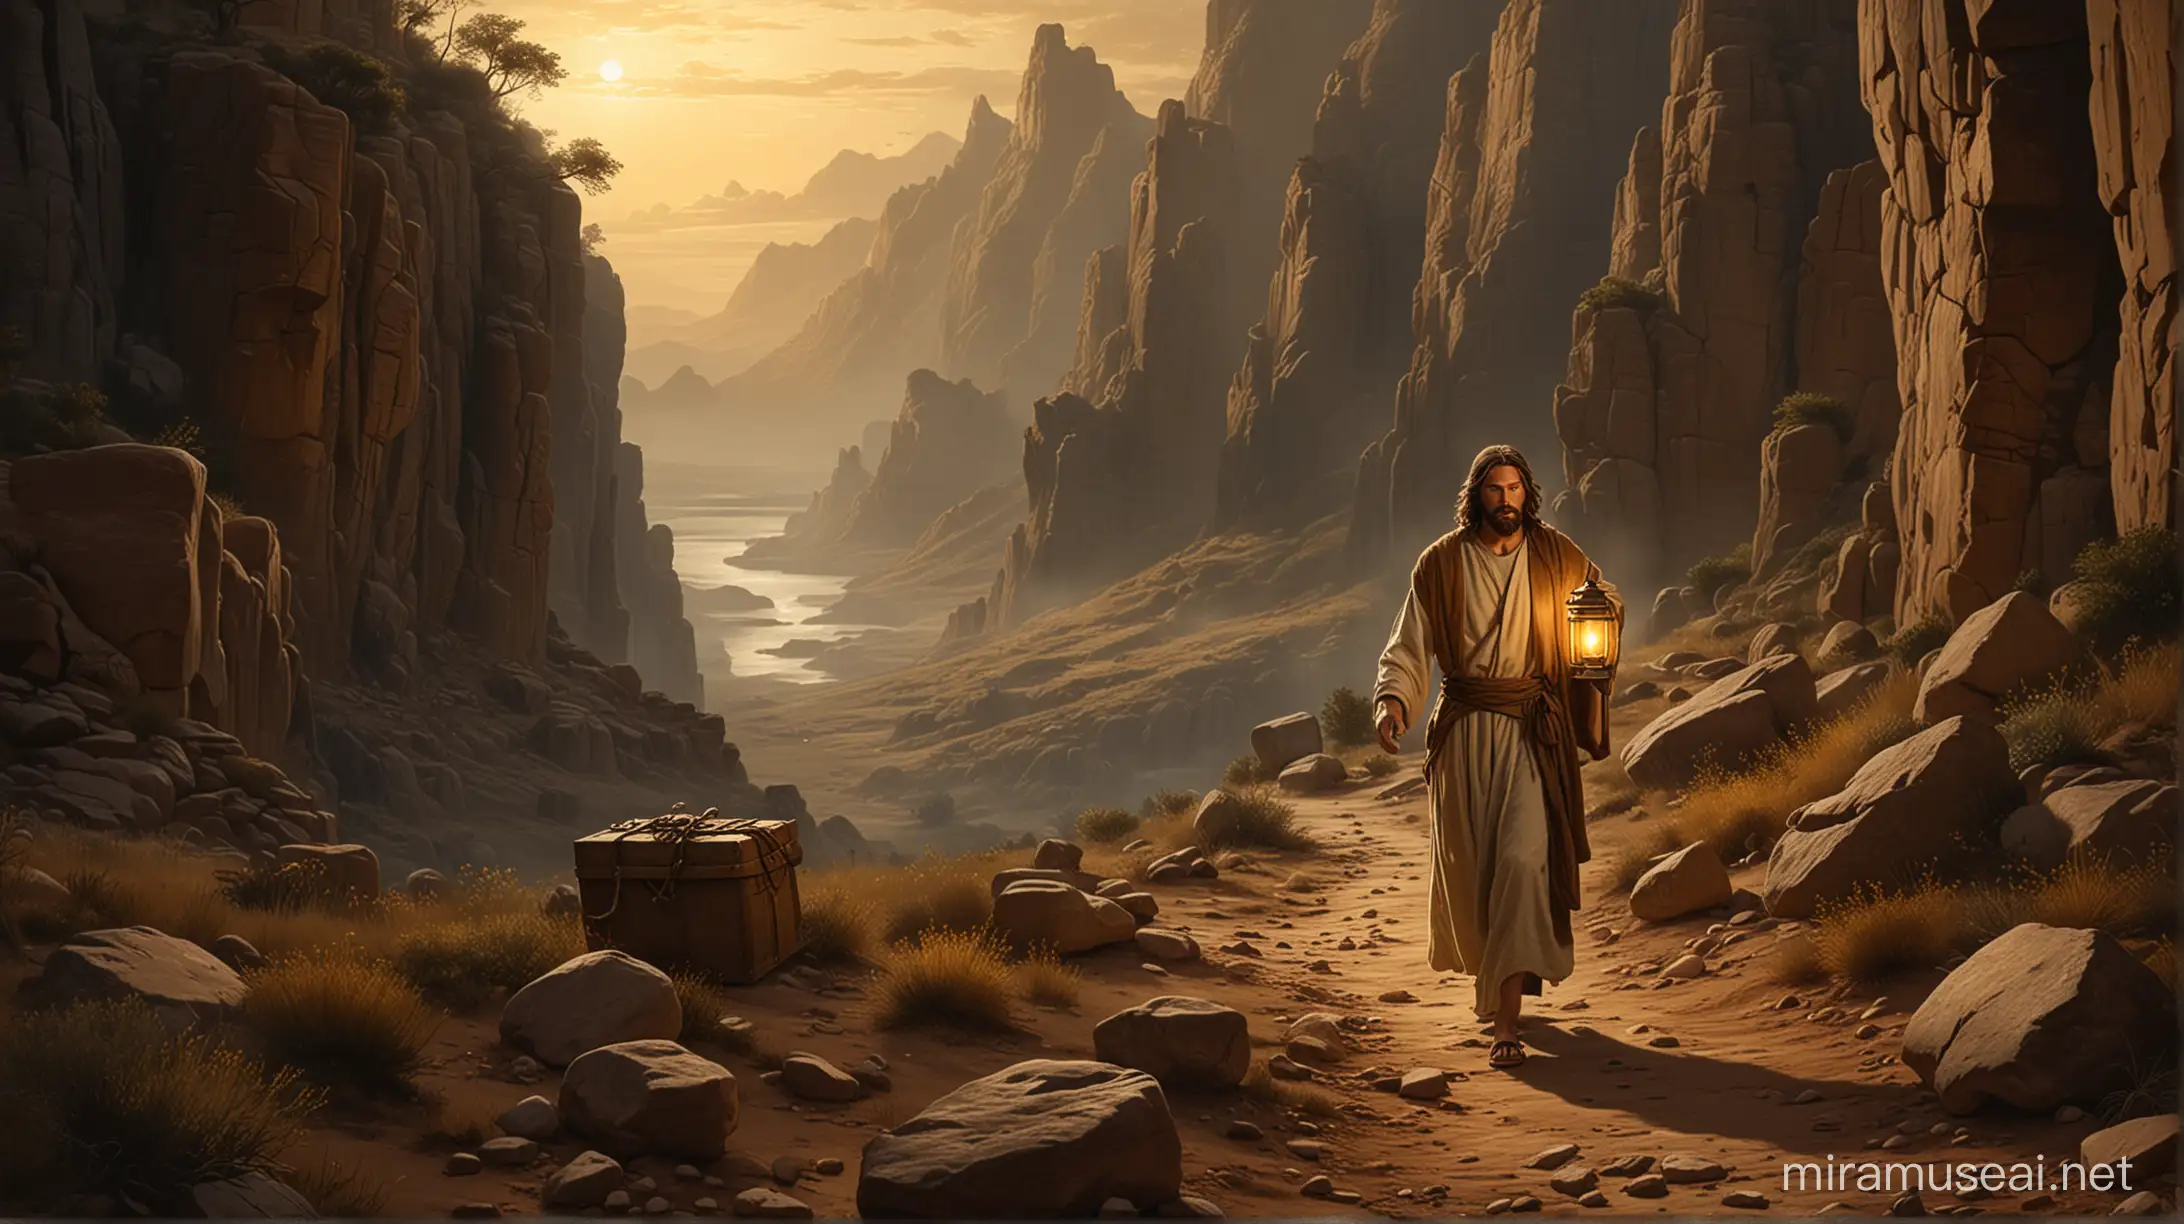 In the image, we see Jesus depicted as a traveler, journeying through a rugged landscape, illuminated by a golden glow from above. With one hand holding a lantern, symbolizing guidance and enlightenment, Jesus searches earnestly, his gaze fixed on a distant, shimmering treasure chest. The scene evokes a sense of mystery and adventure, highlighting Jesus' relentless pursuit of the greatest treasure: the souls of humanity. black background